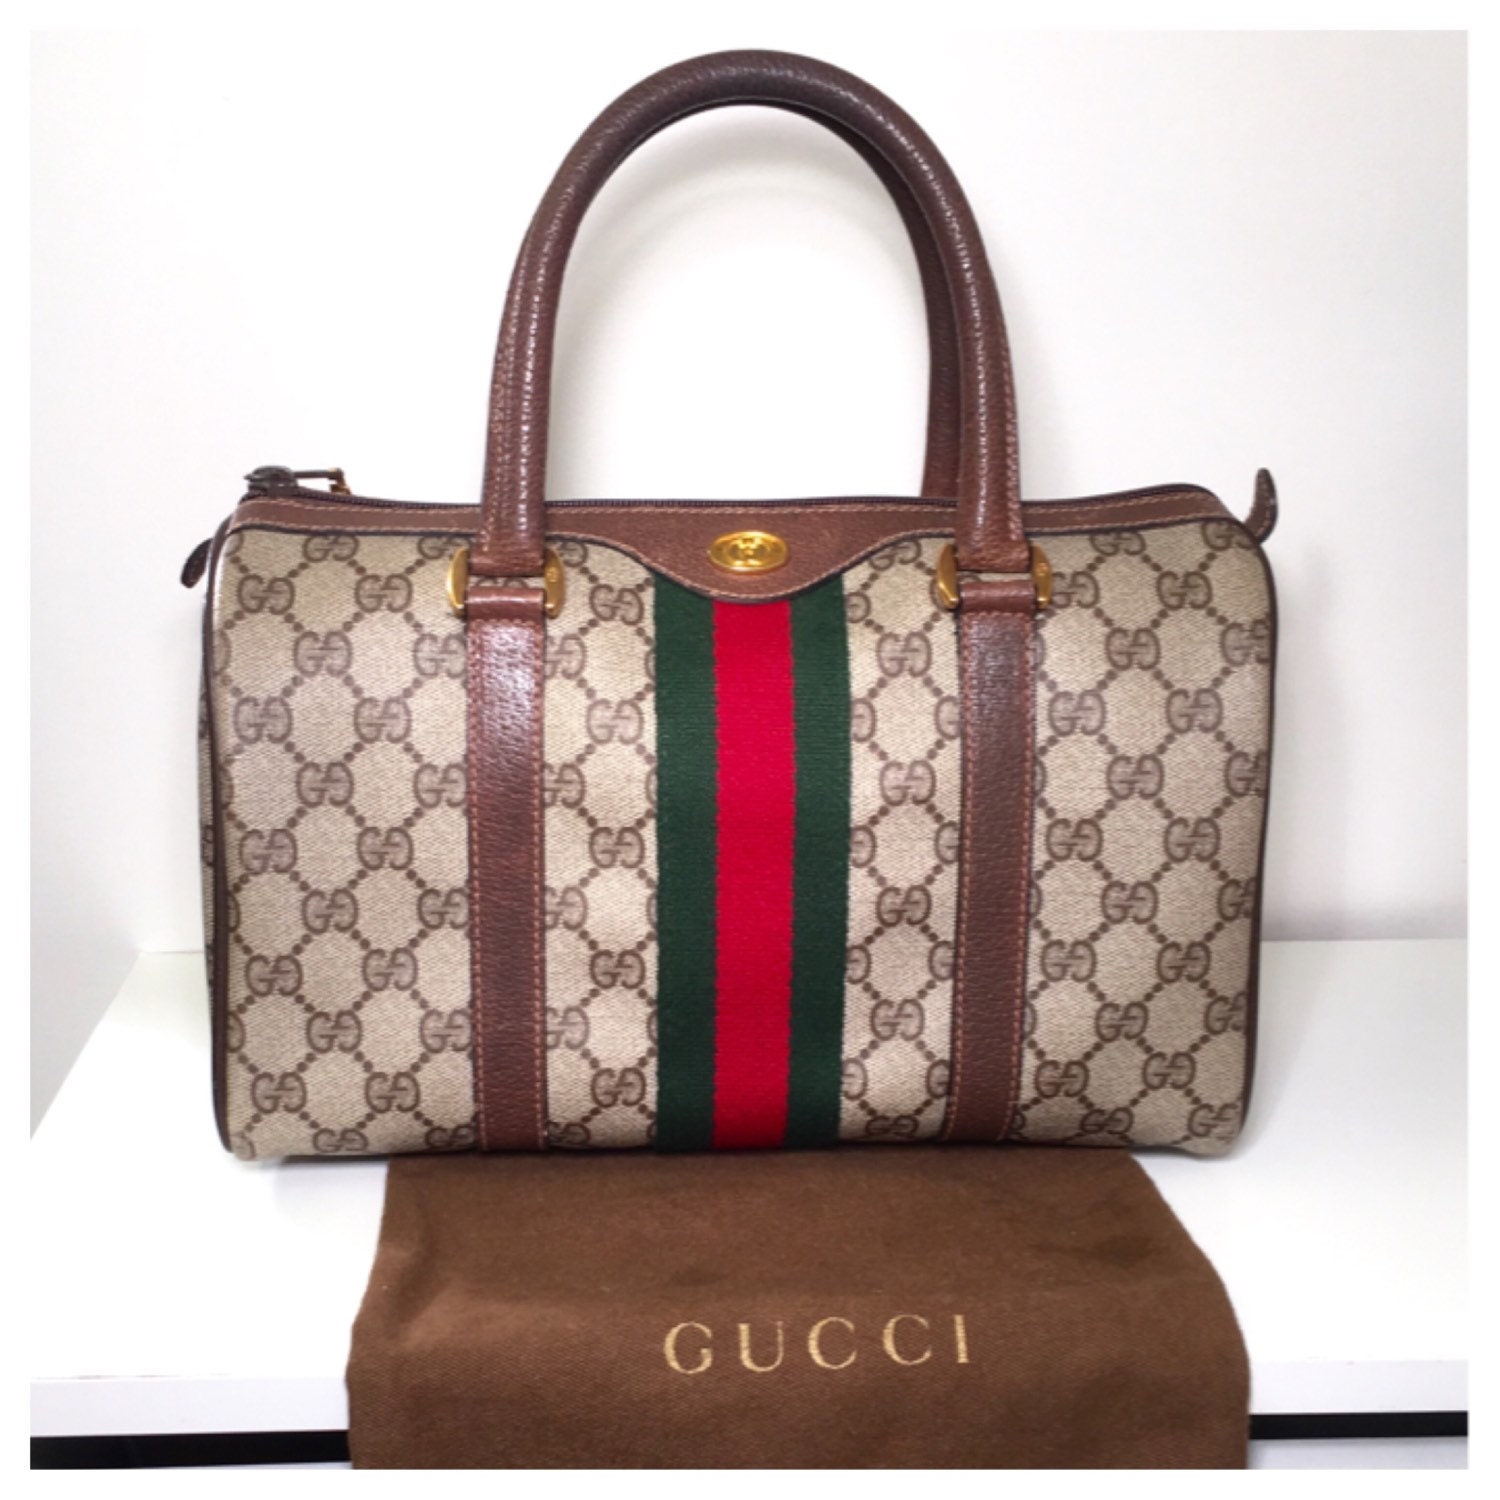 Vintage Gucci Bags 1990s | Paul Smith